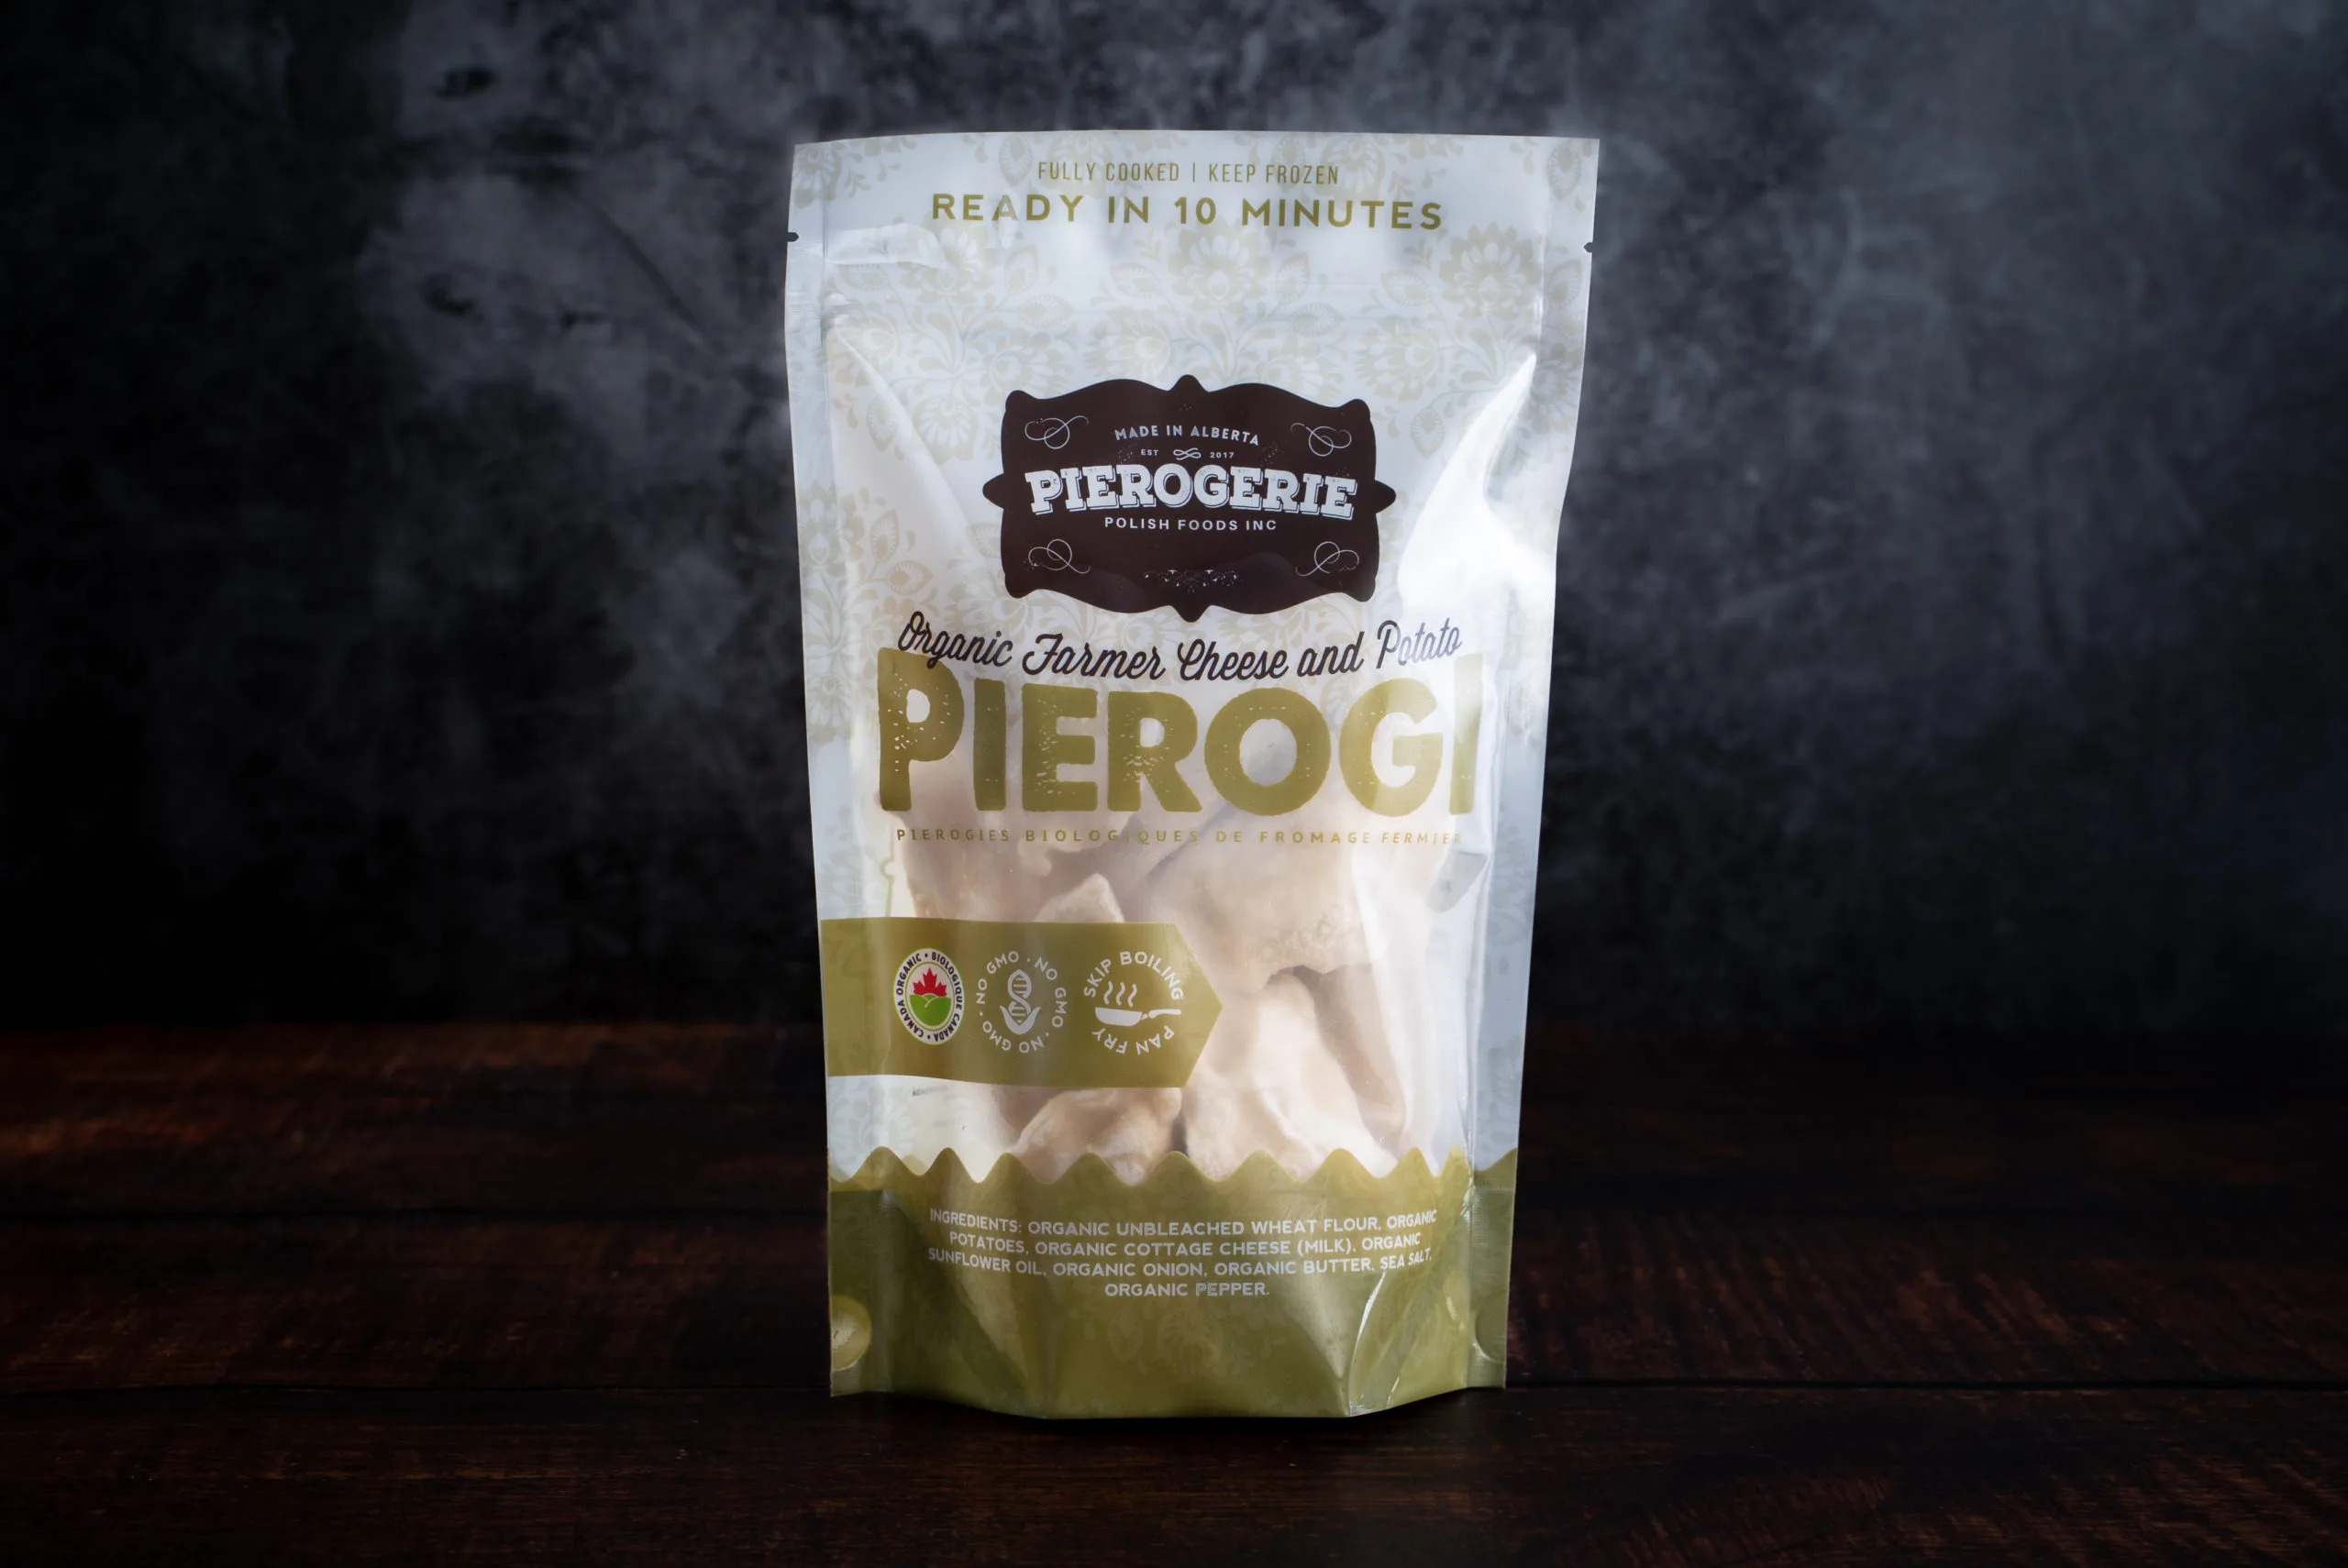 A bag of Farmer Cheese and Potato Pierogi showing the front